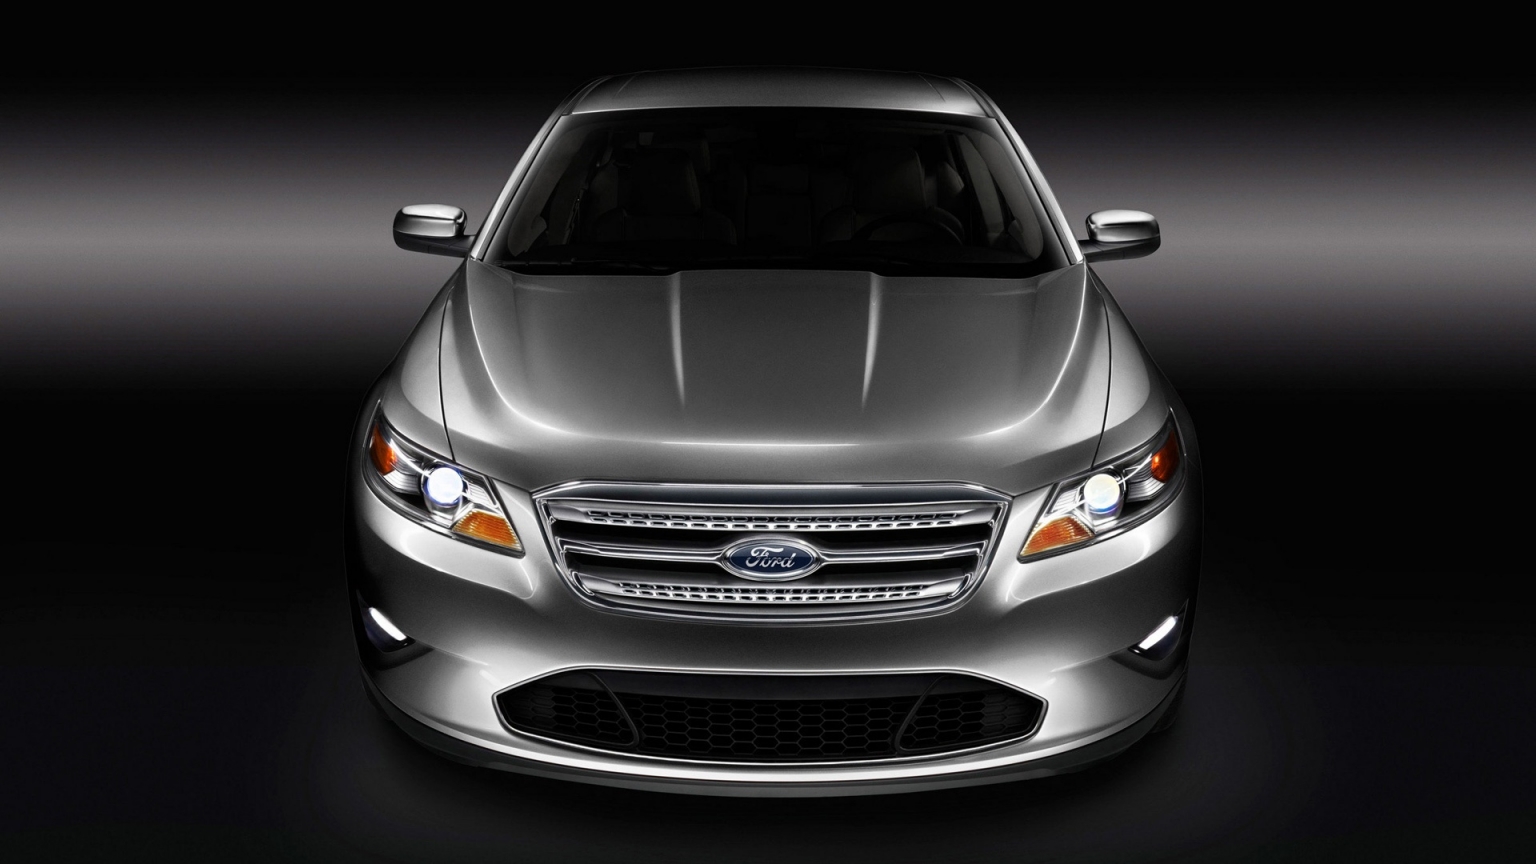 Ford Taurus 2010 for 1536 x 864 HDTV resolution